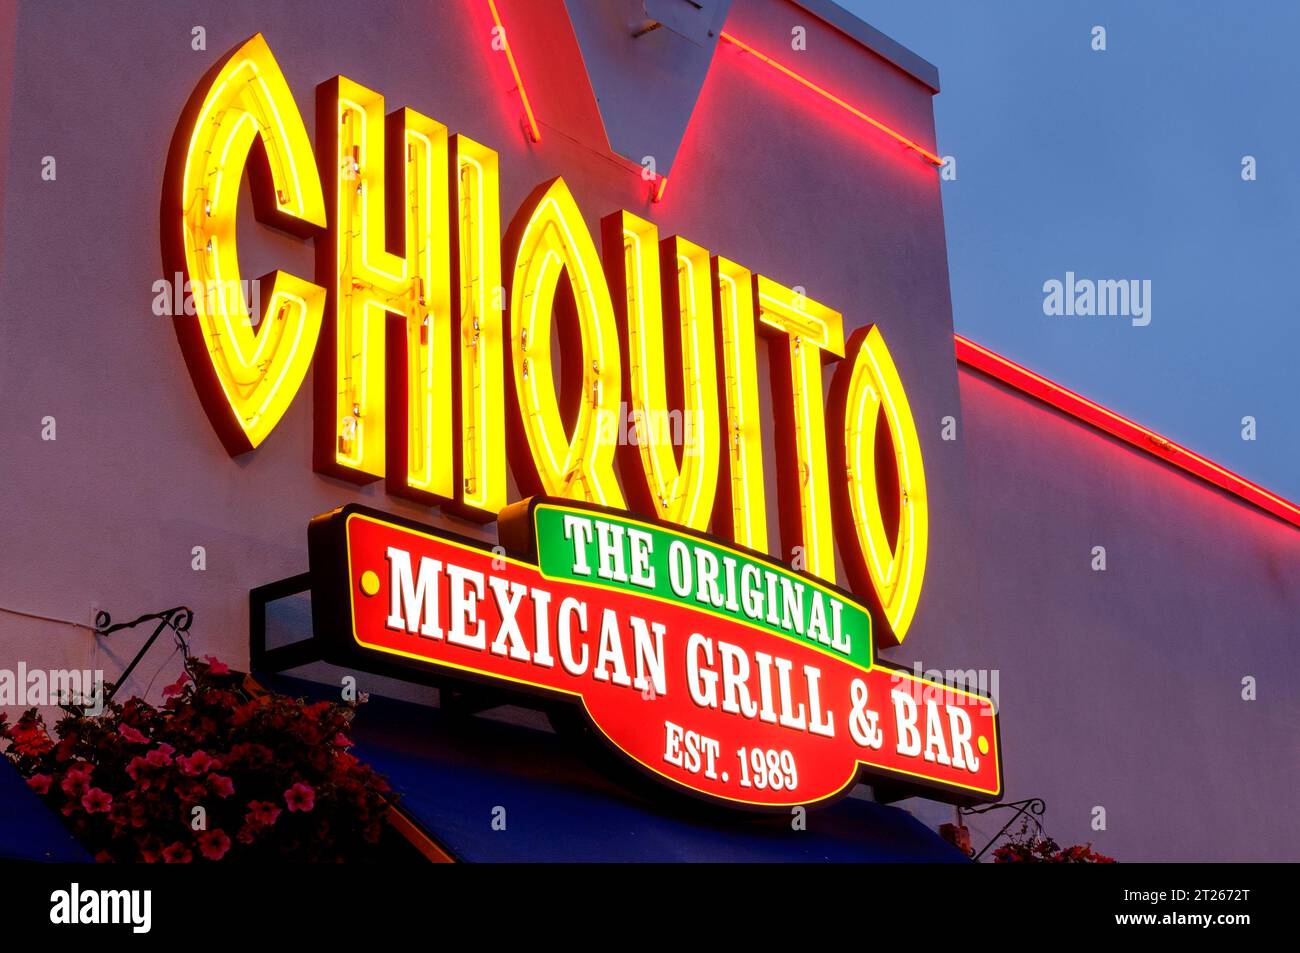 The exterior of a Chiquito Mexican restaurant in Ellesmere Port UK at night Stock Photo